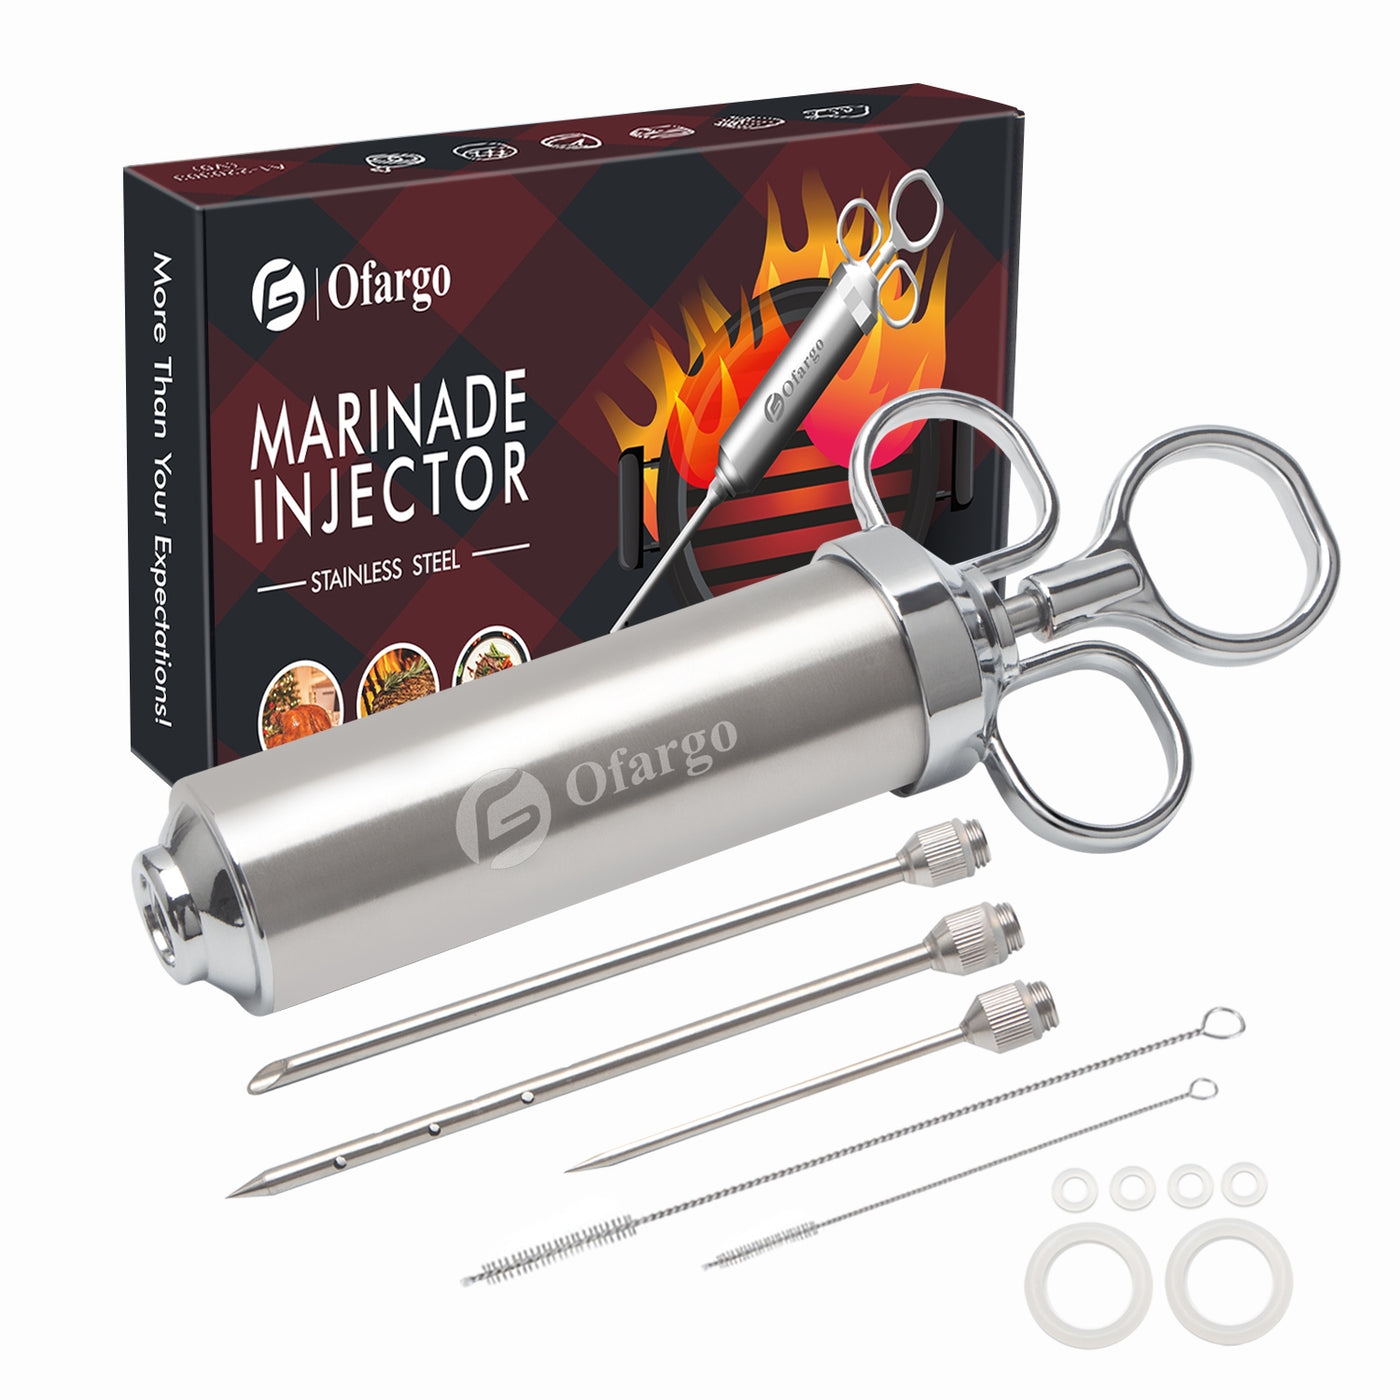 Ofargo Meat Injector, Meat Injectors for Smoking with 3 Marinade Food  Injector Syringe Needles, Injector Marinades for Meats, Turkey, Brisket;  2-oz